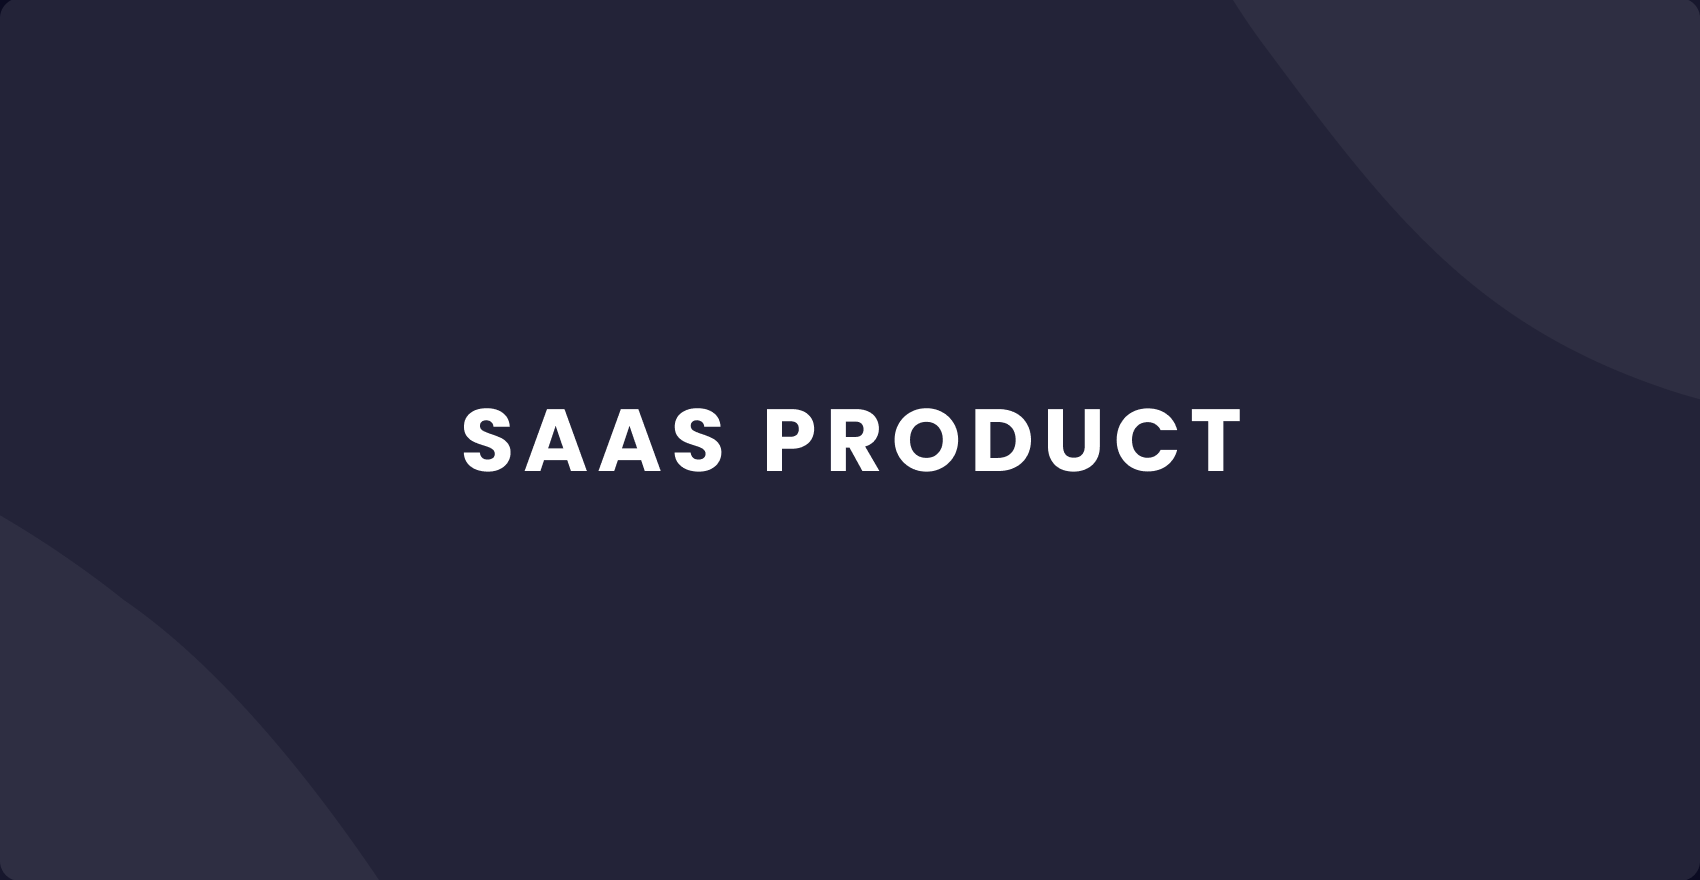 How to Build a SaaS Product to Set up Your Software Business